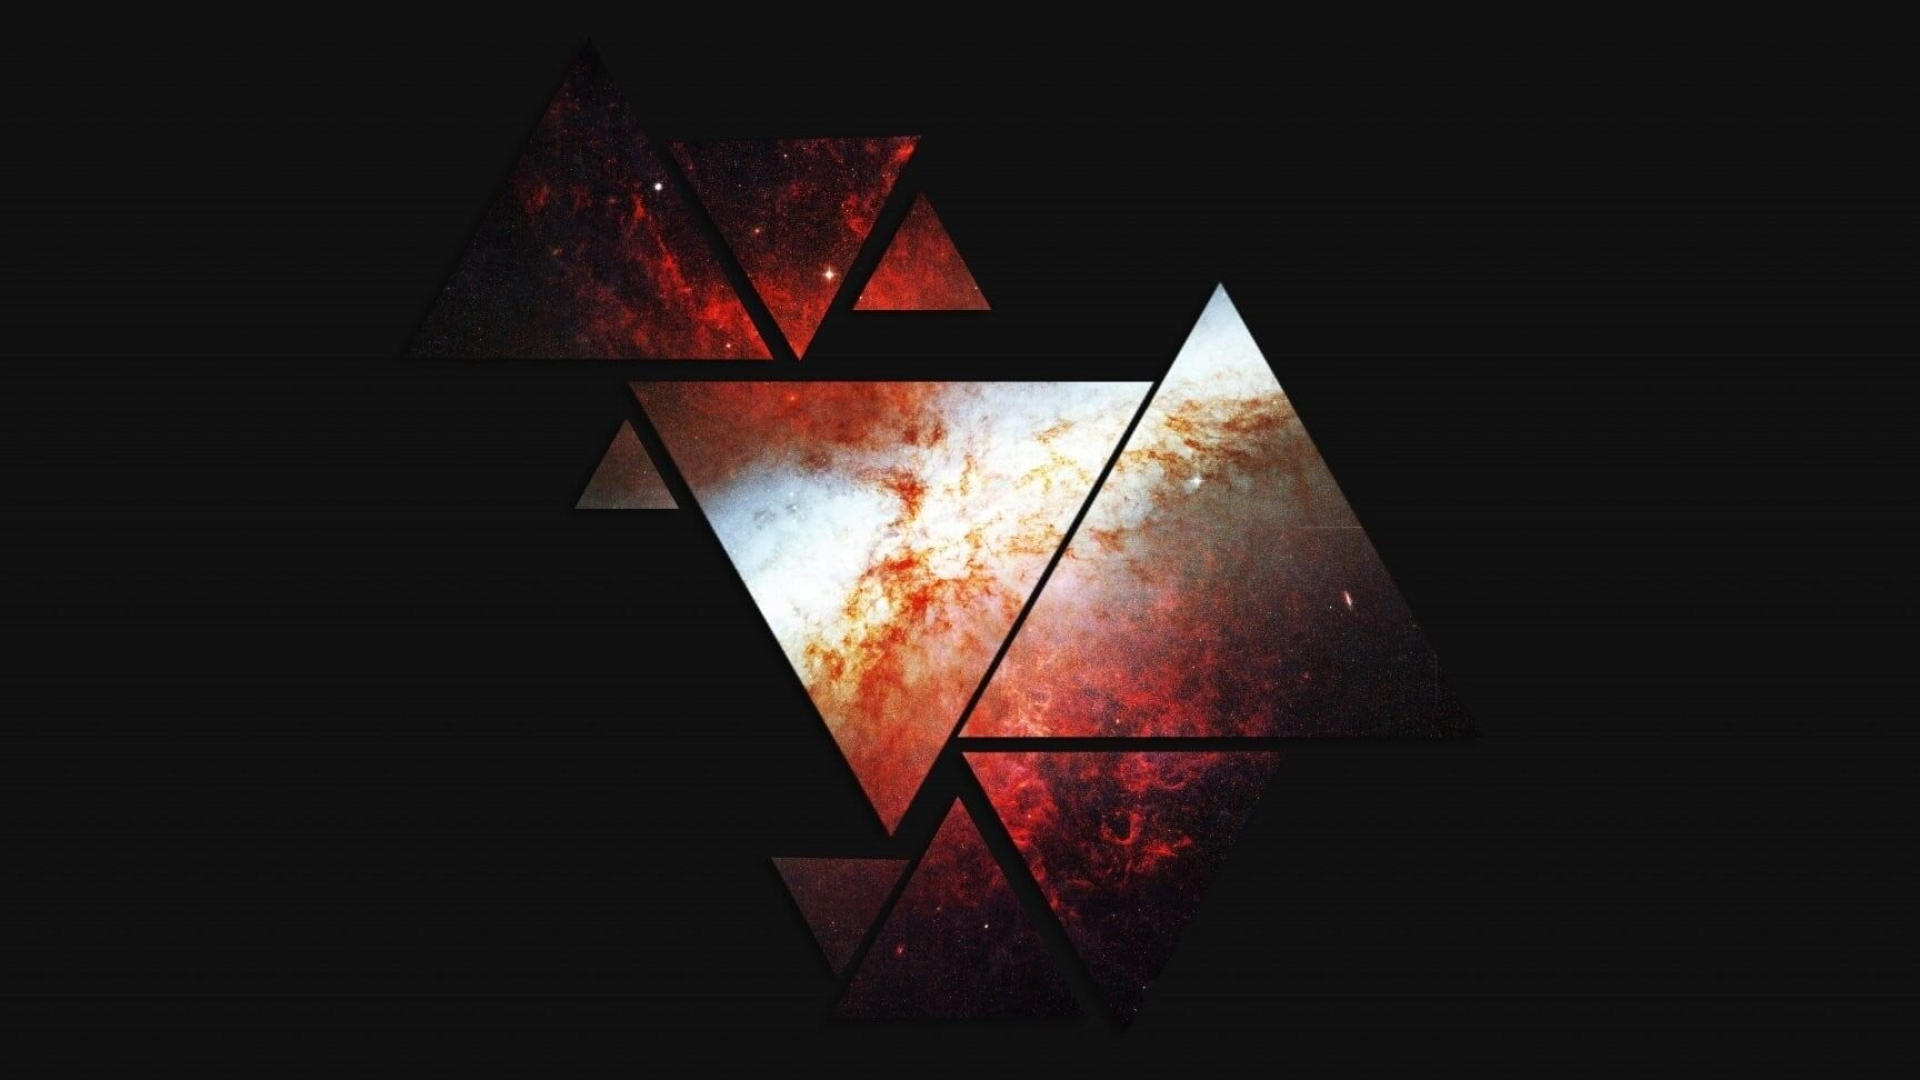 Geometry: Triangles, White and red, Abstract, Astronomical object, Nebula. 1920x1080 Full HD Background.